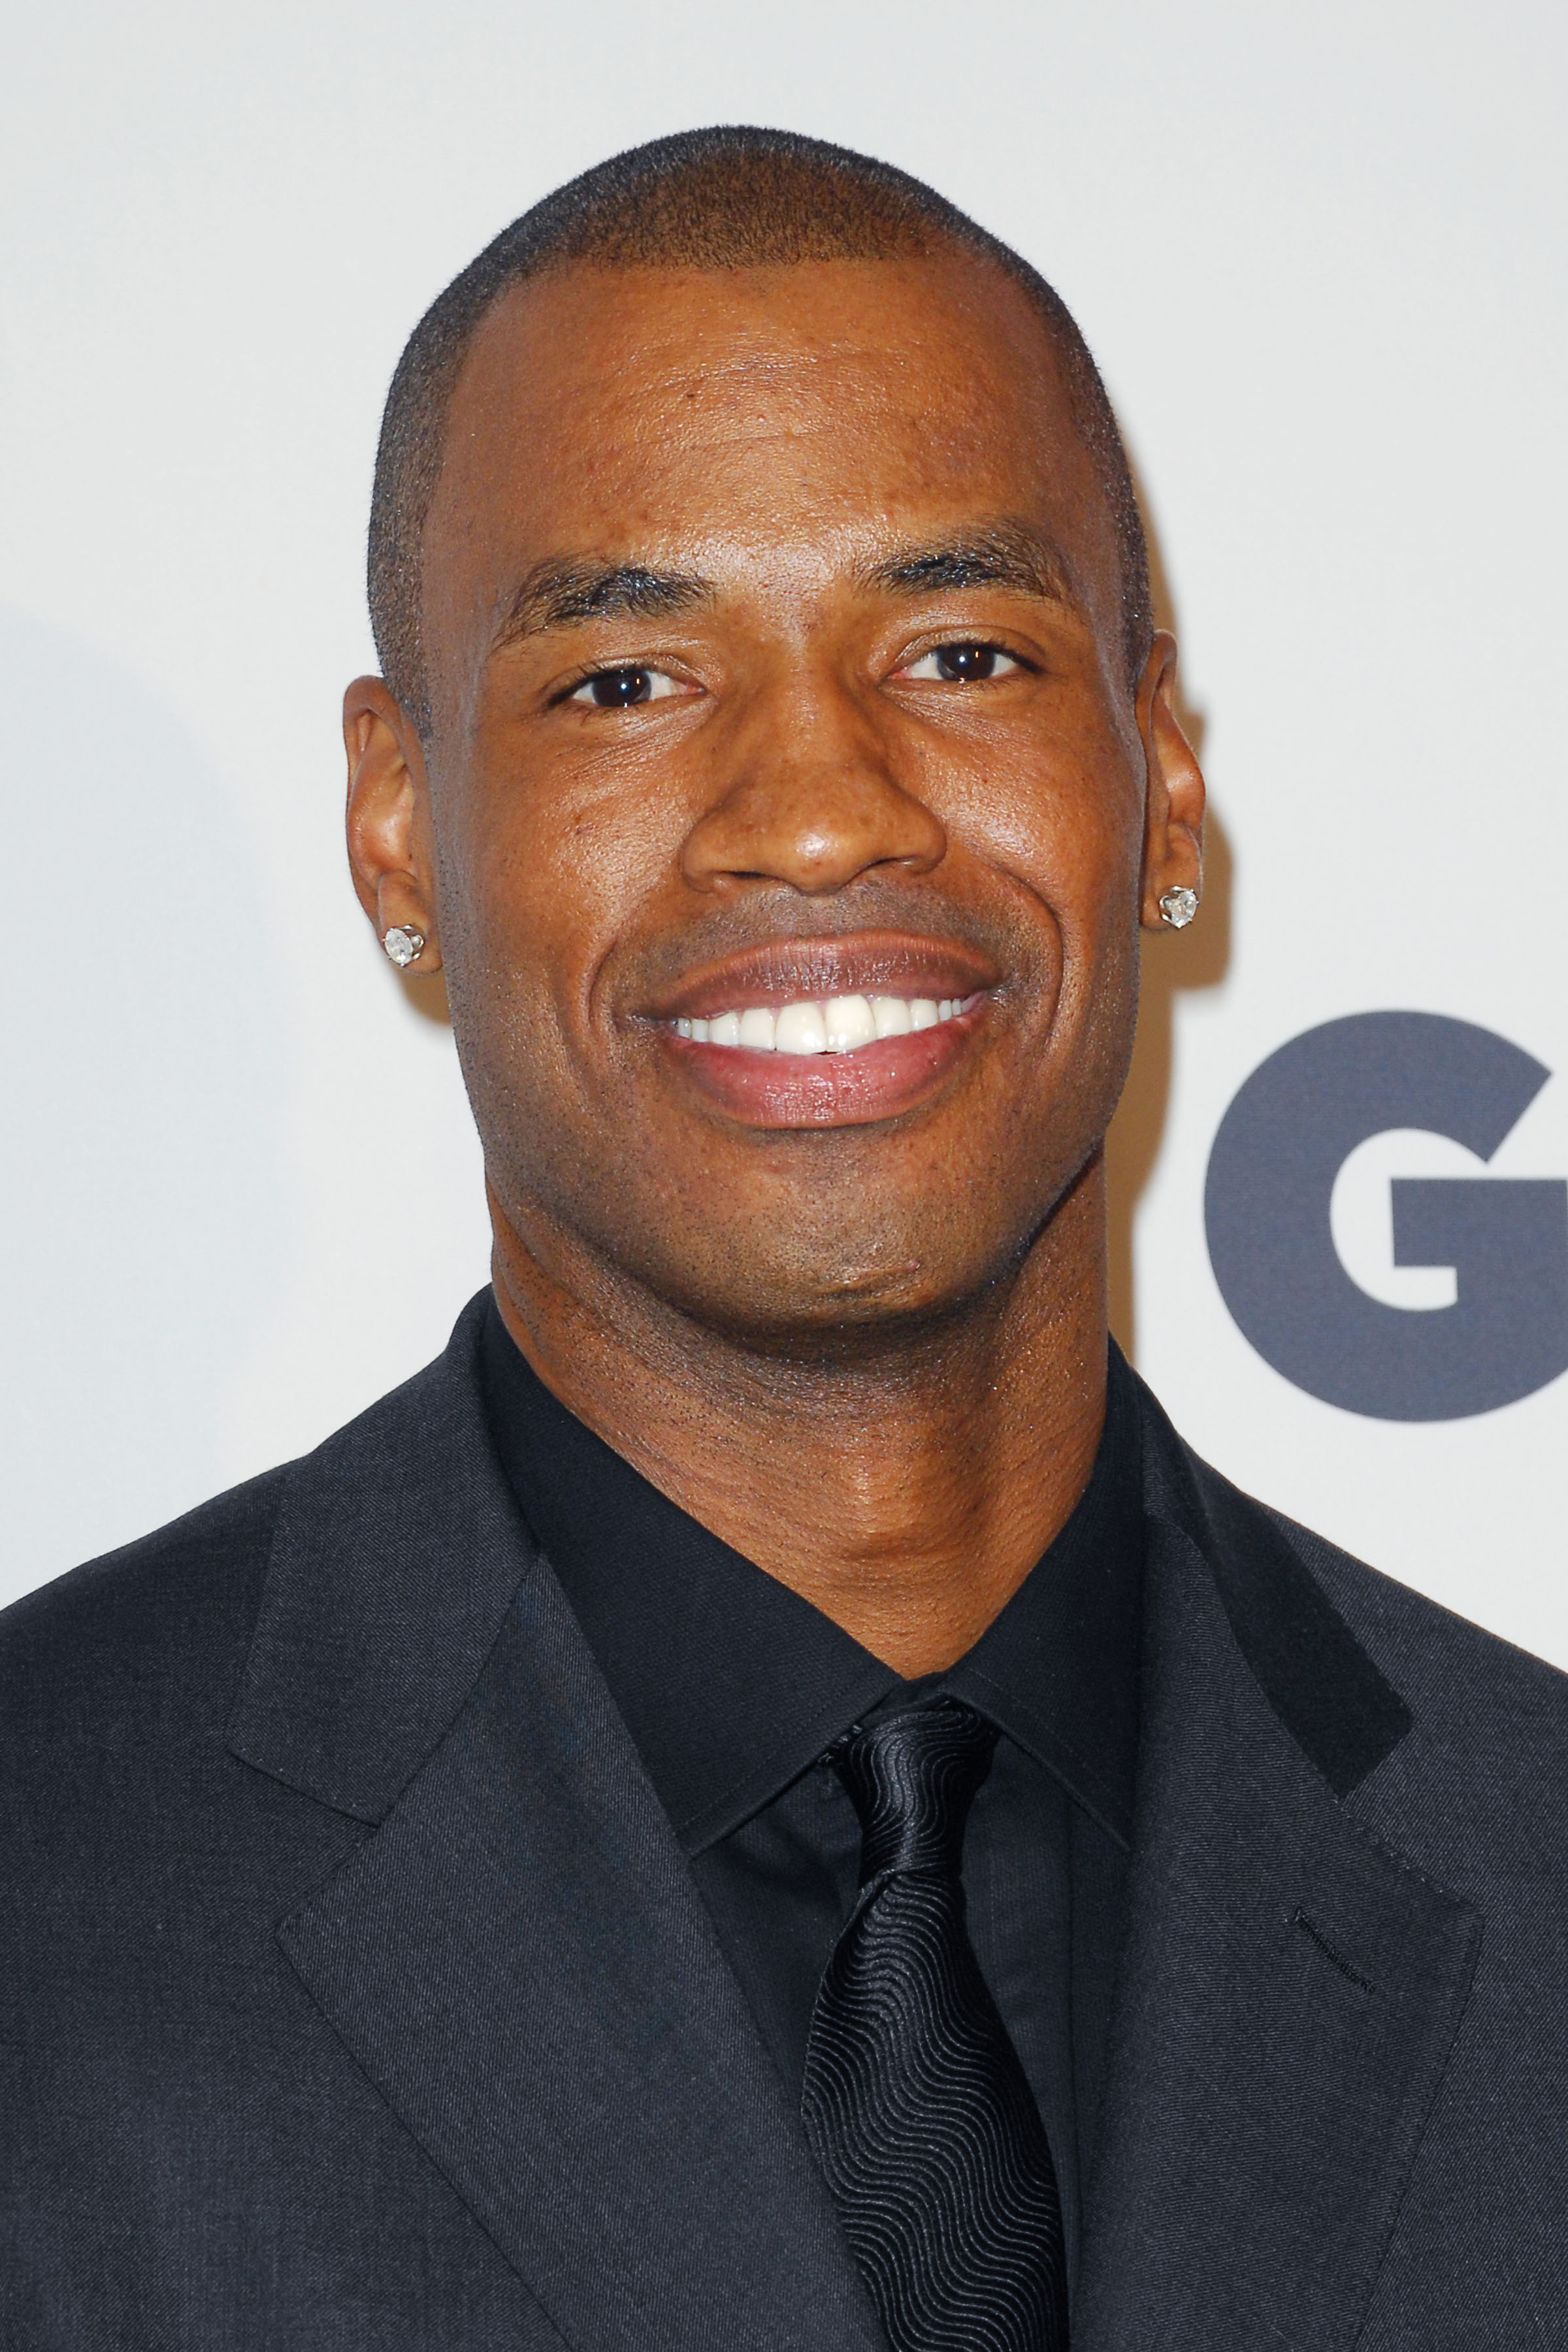 Jason Collins, basketball player
                               Jason’s kindness and fierceness alike derive from that word too often bandied about and too rarely true: integrity. —Chelsea Clinton, vice chair of the Clinton Foundation